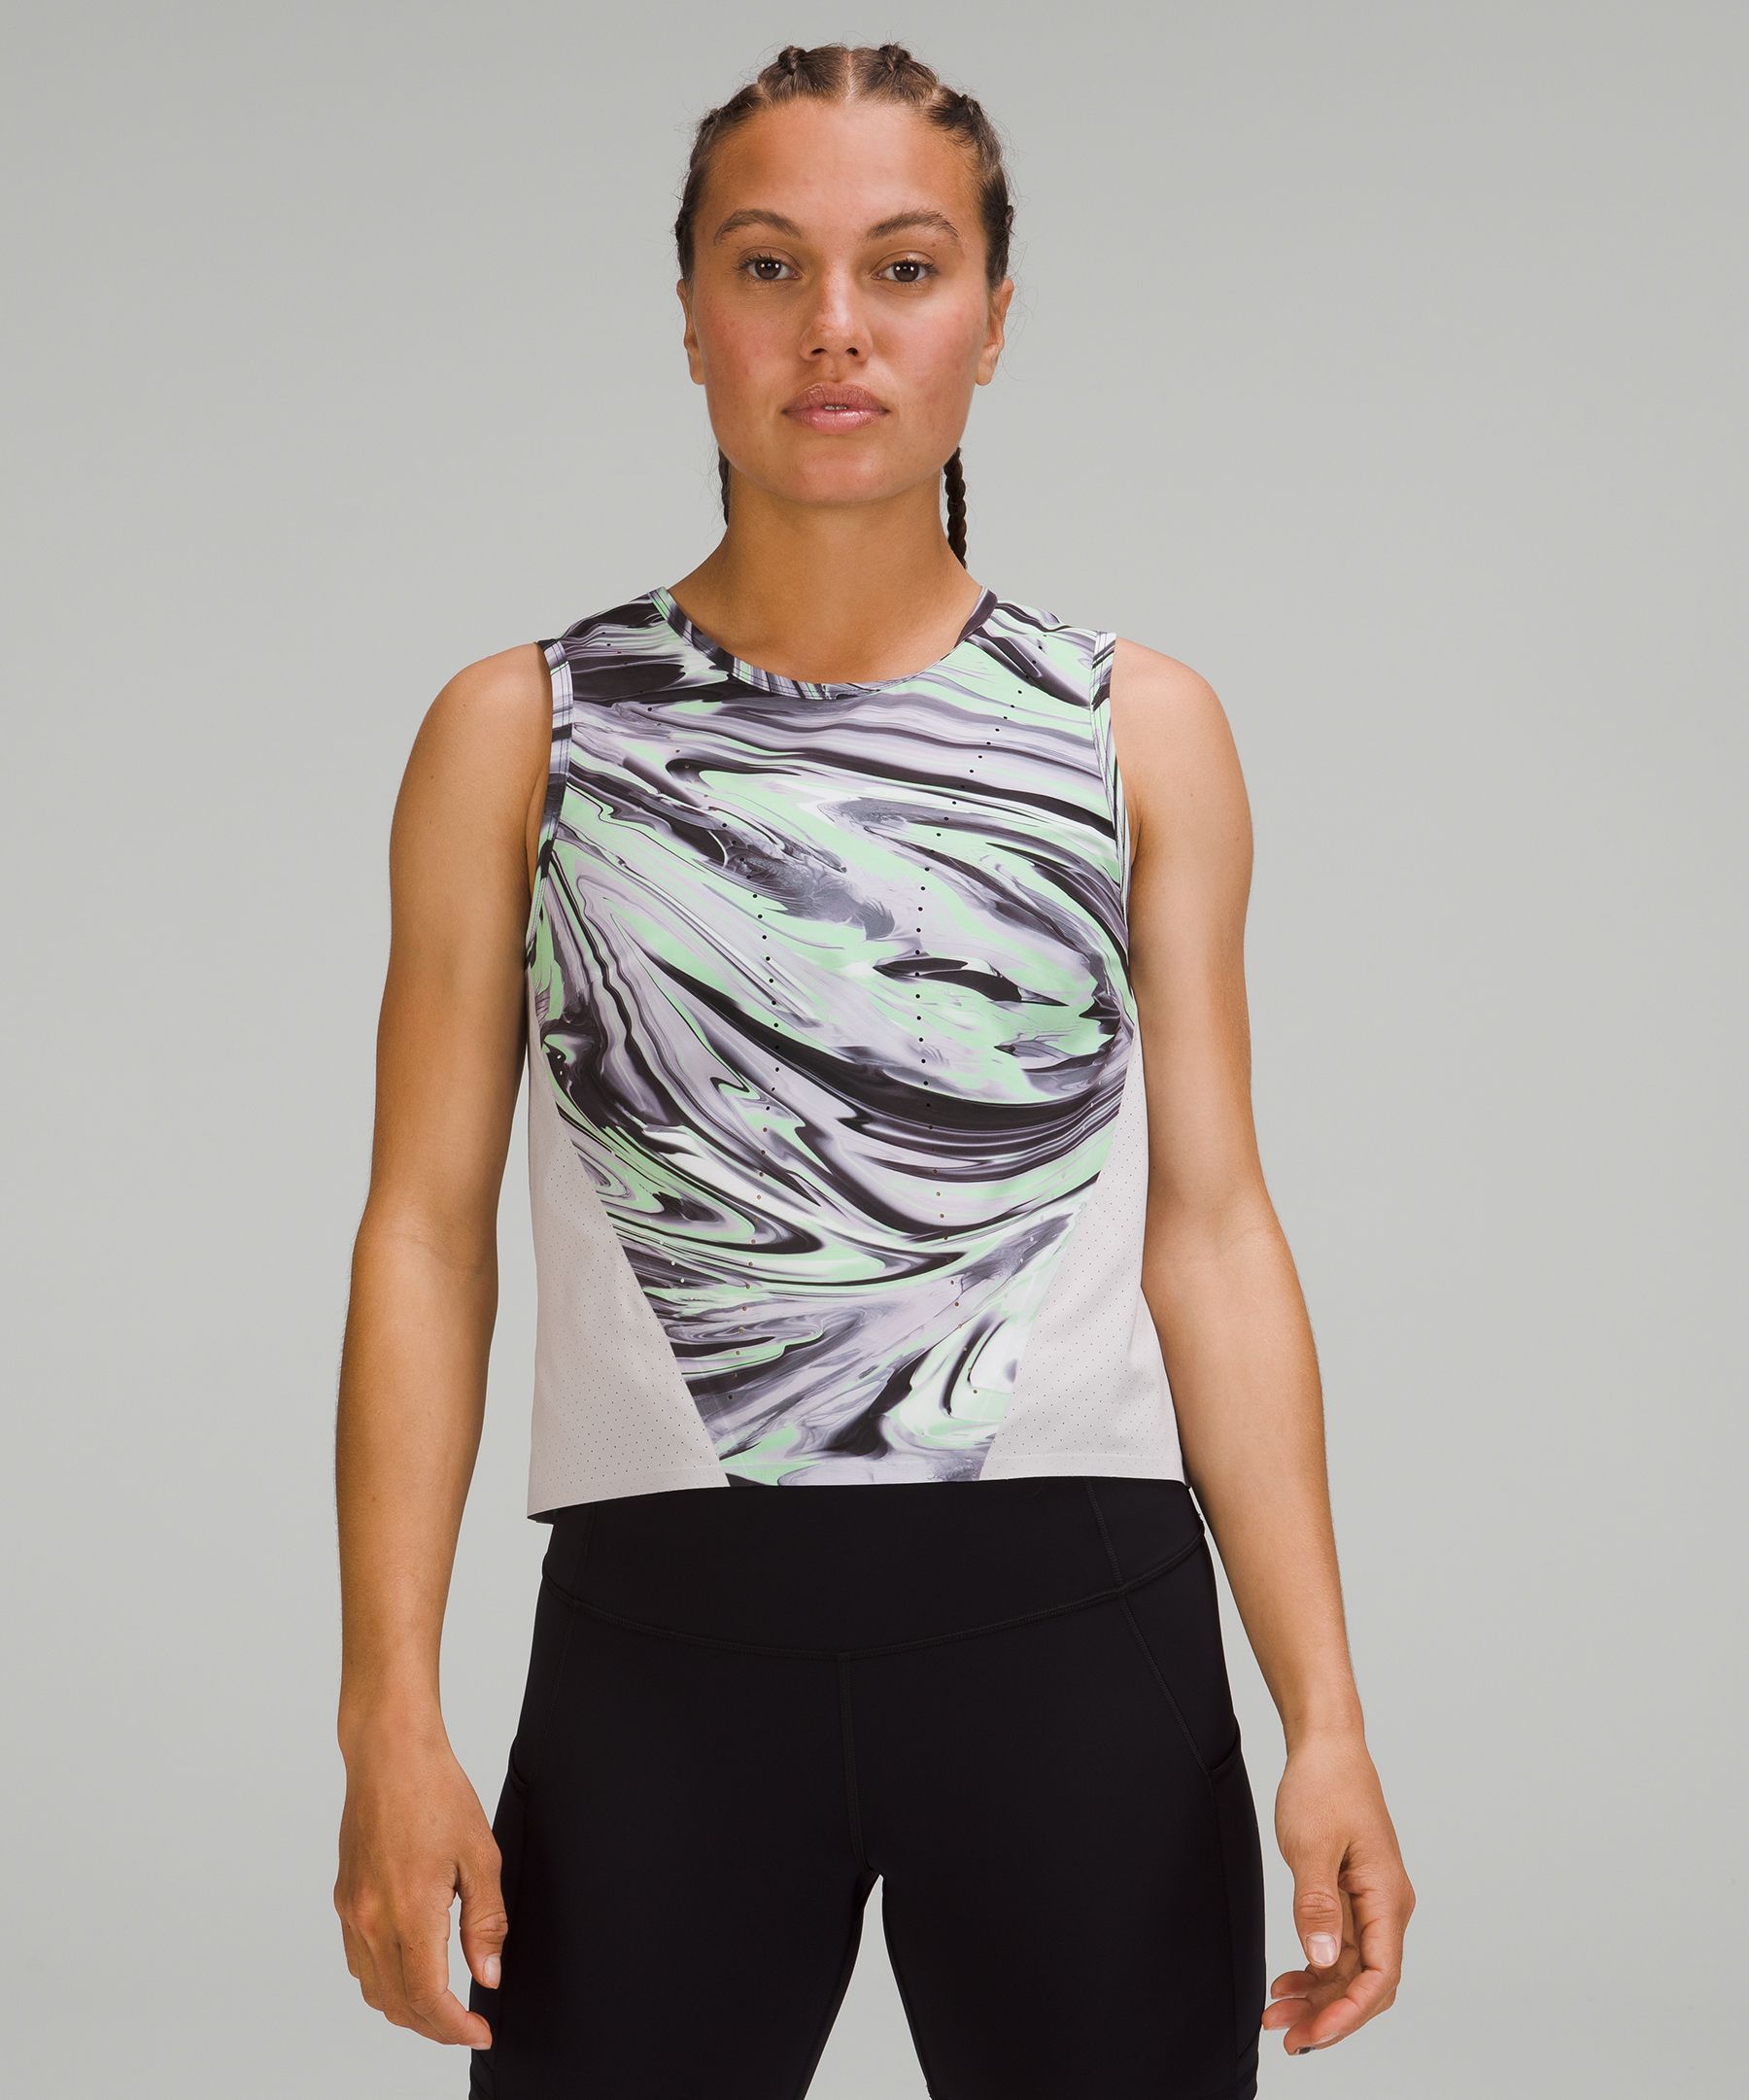 Lululemon Athletica Color Block Gray Active Tank Size 8 - 53% off